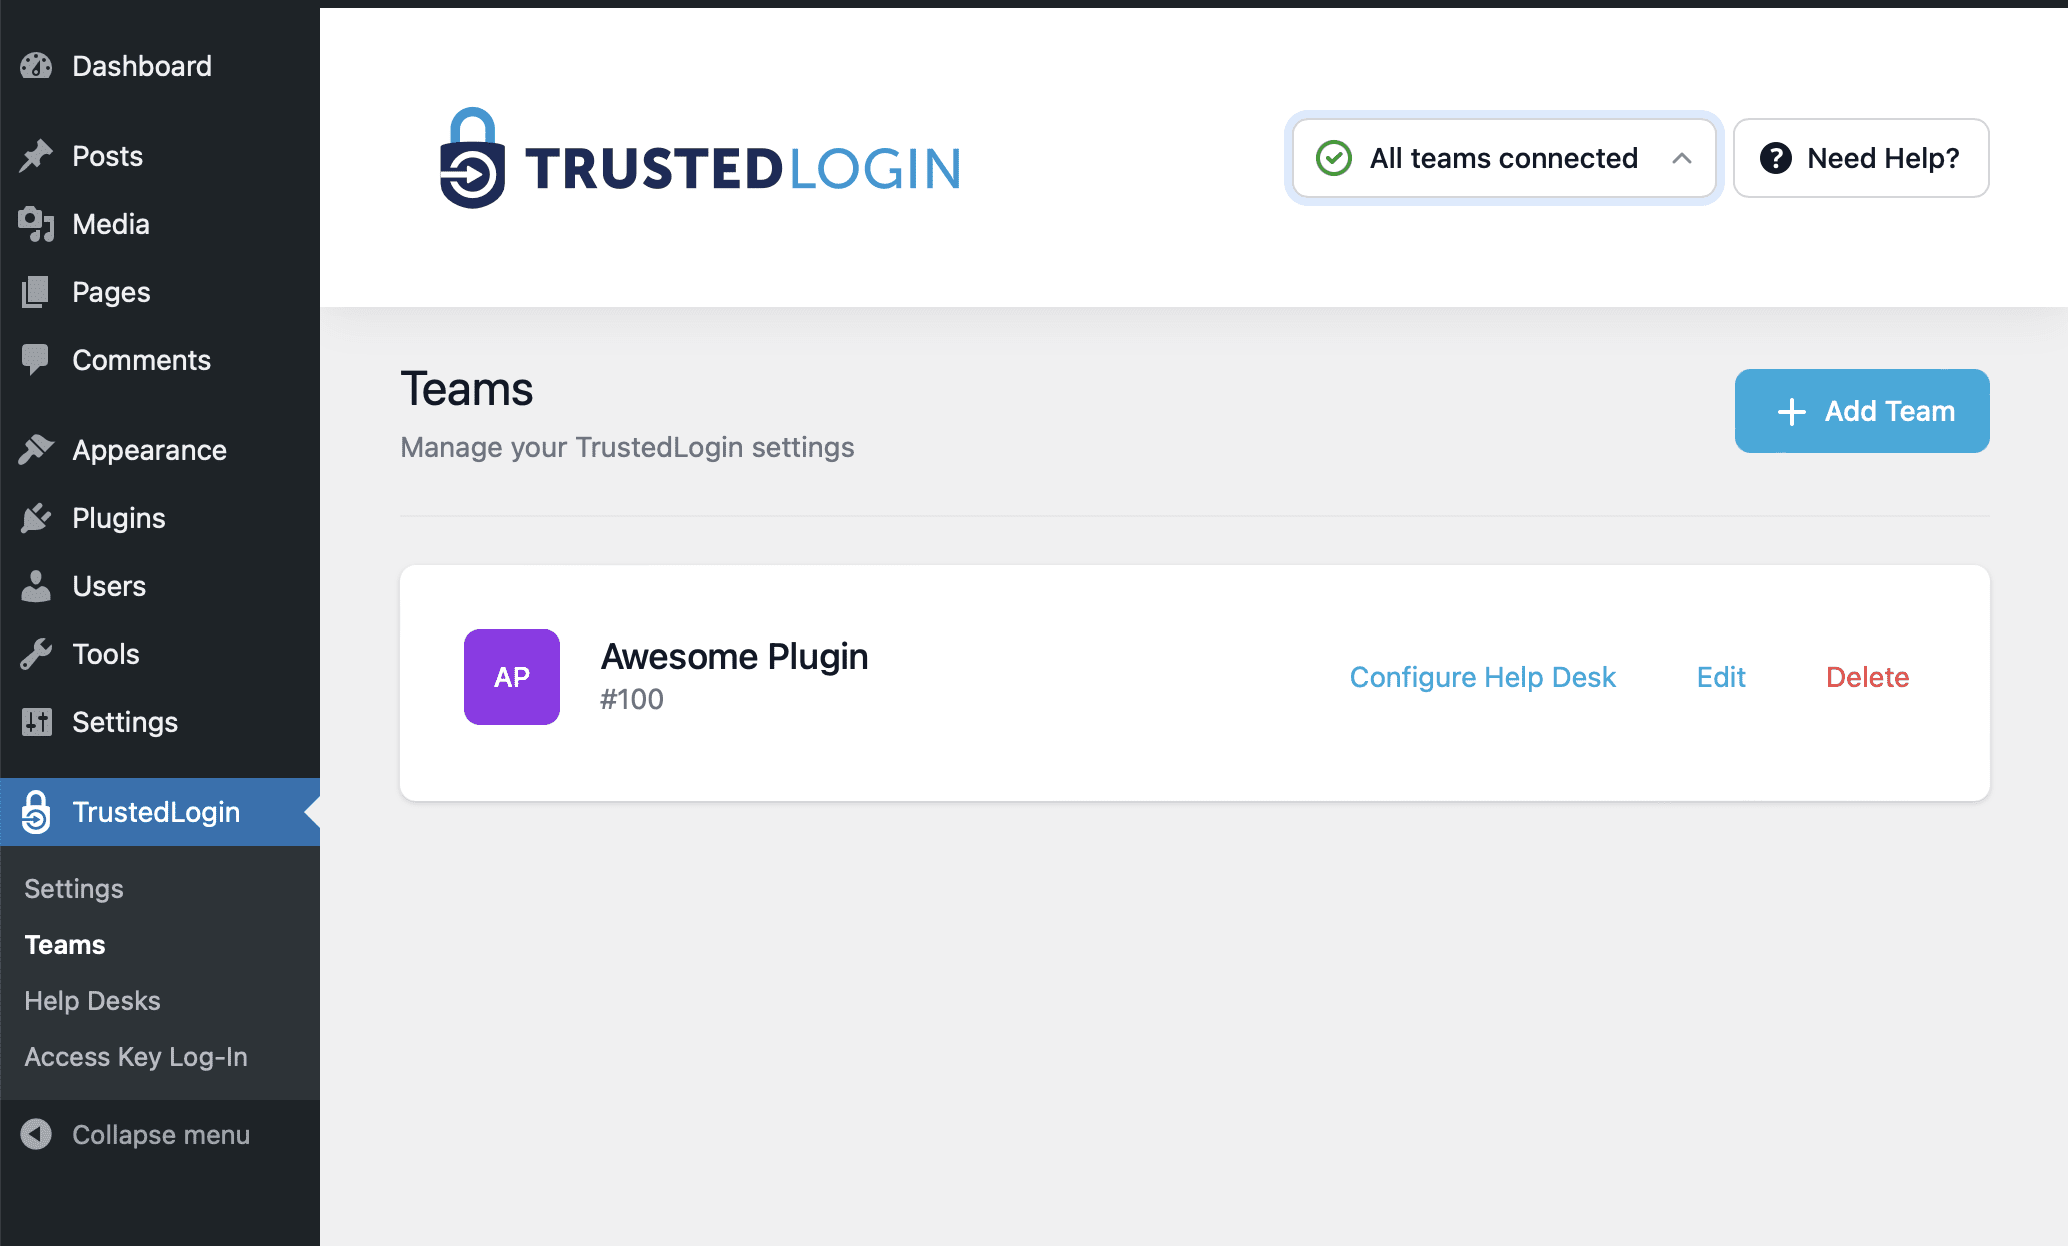 Inside the WordPress admin, with TrustedLogin &quot;Teams&quot; sub-menu selected and a teams list layout showing